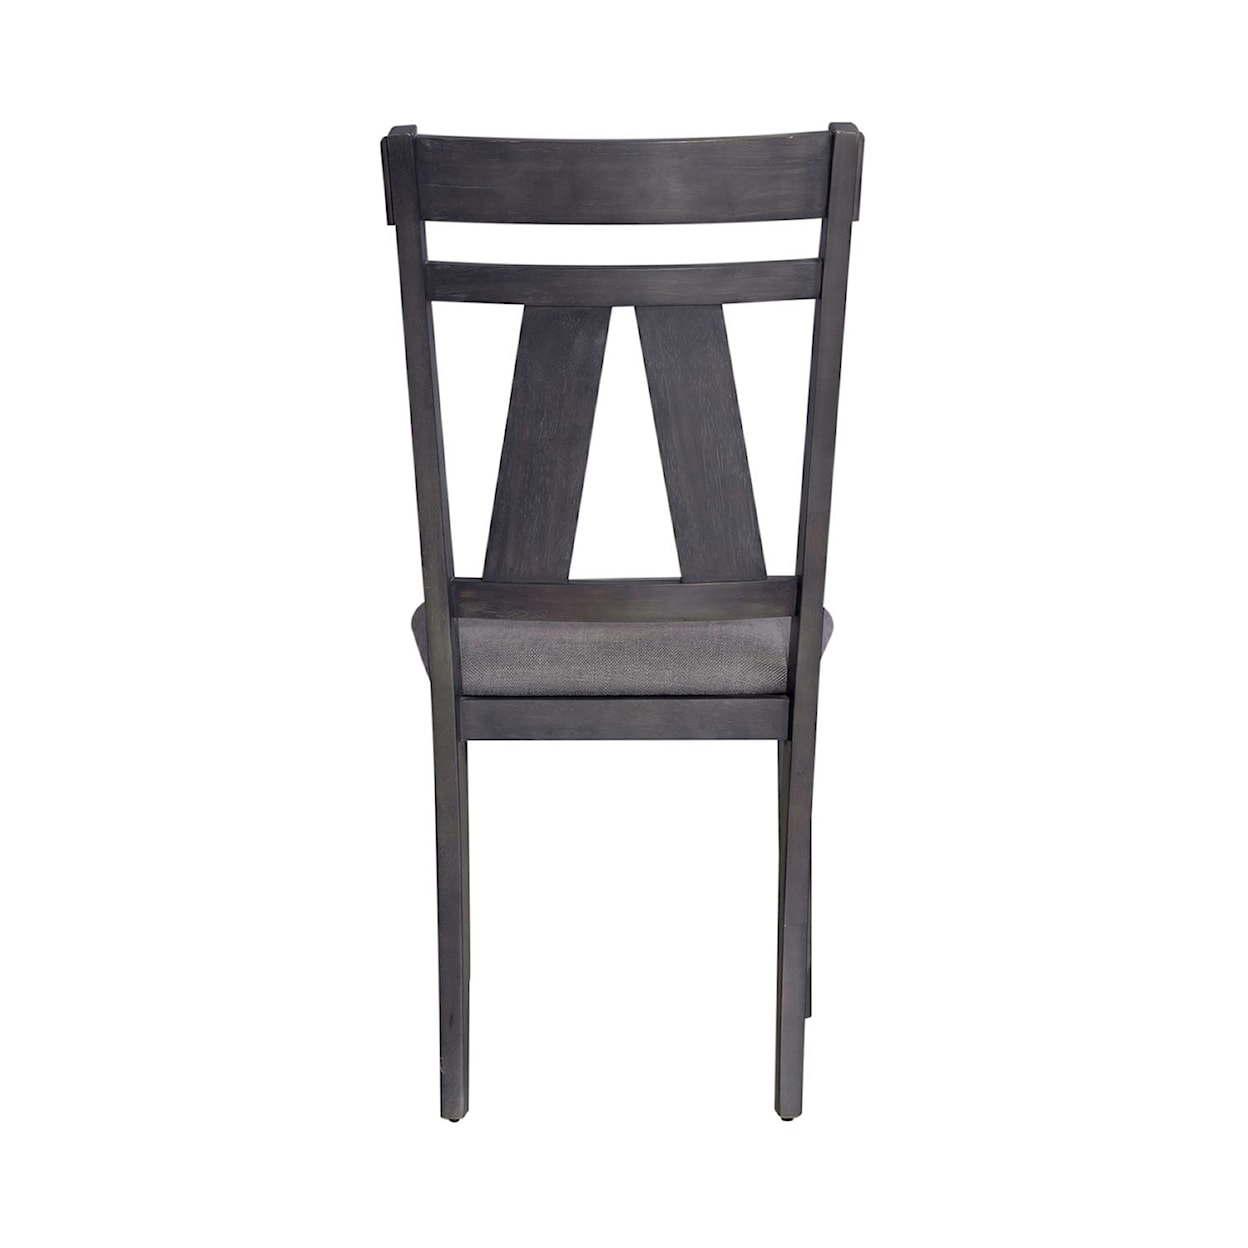 Libby Lawson Dining Side Chair